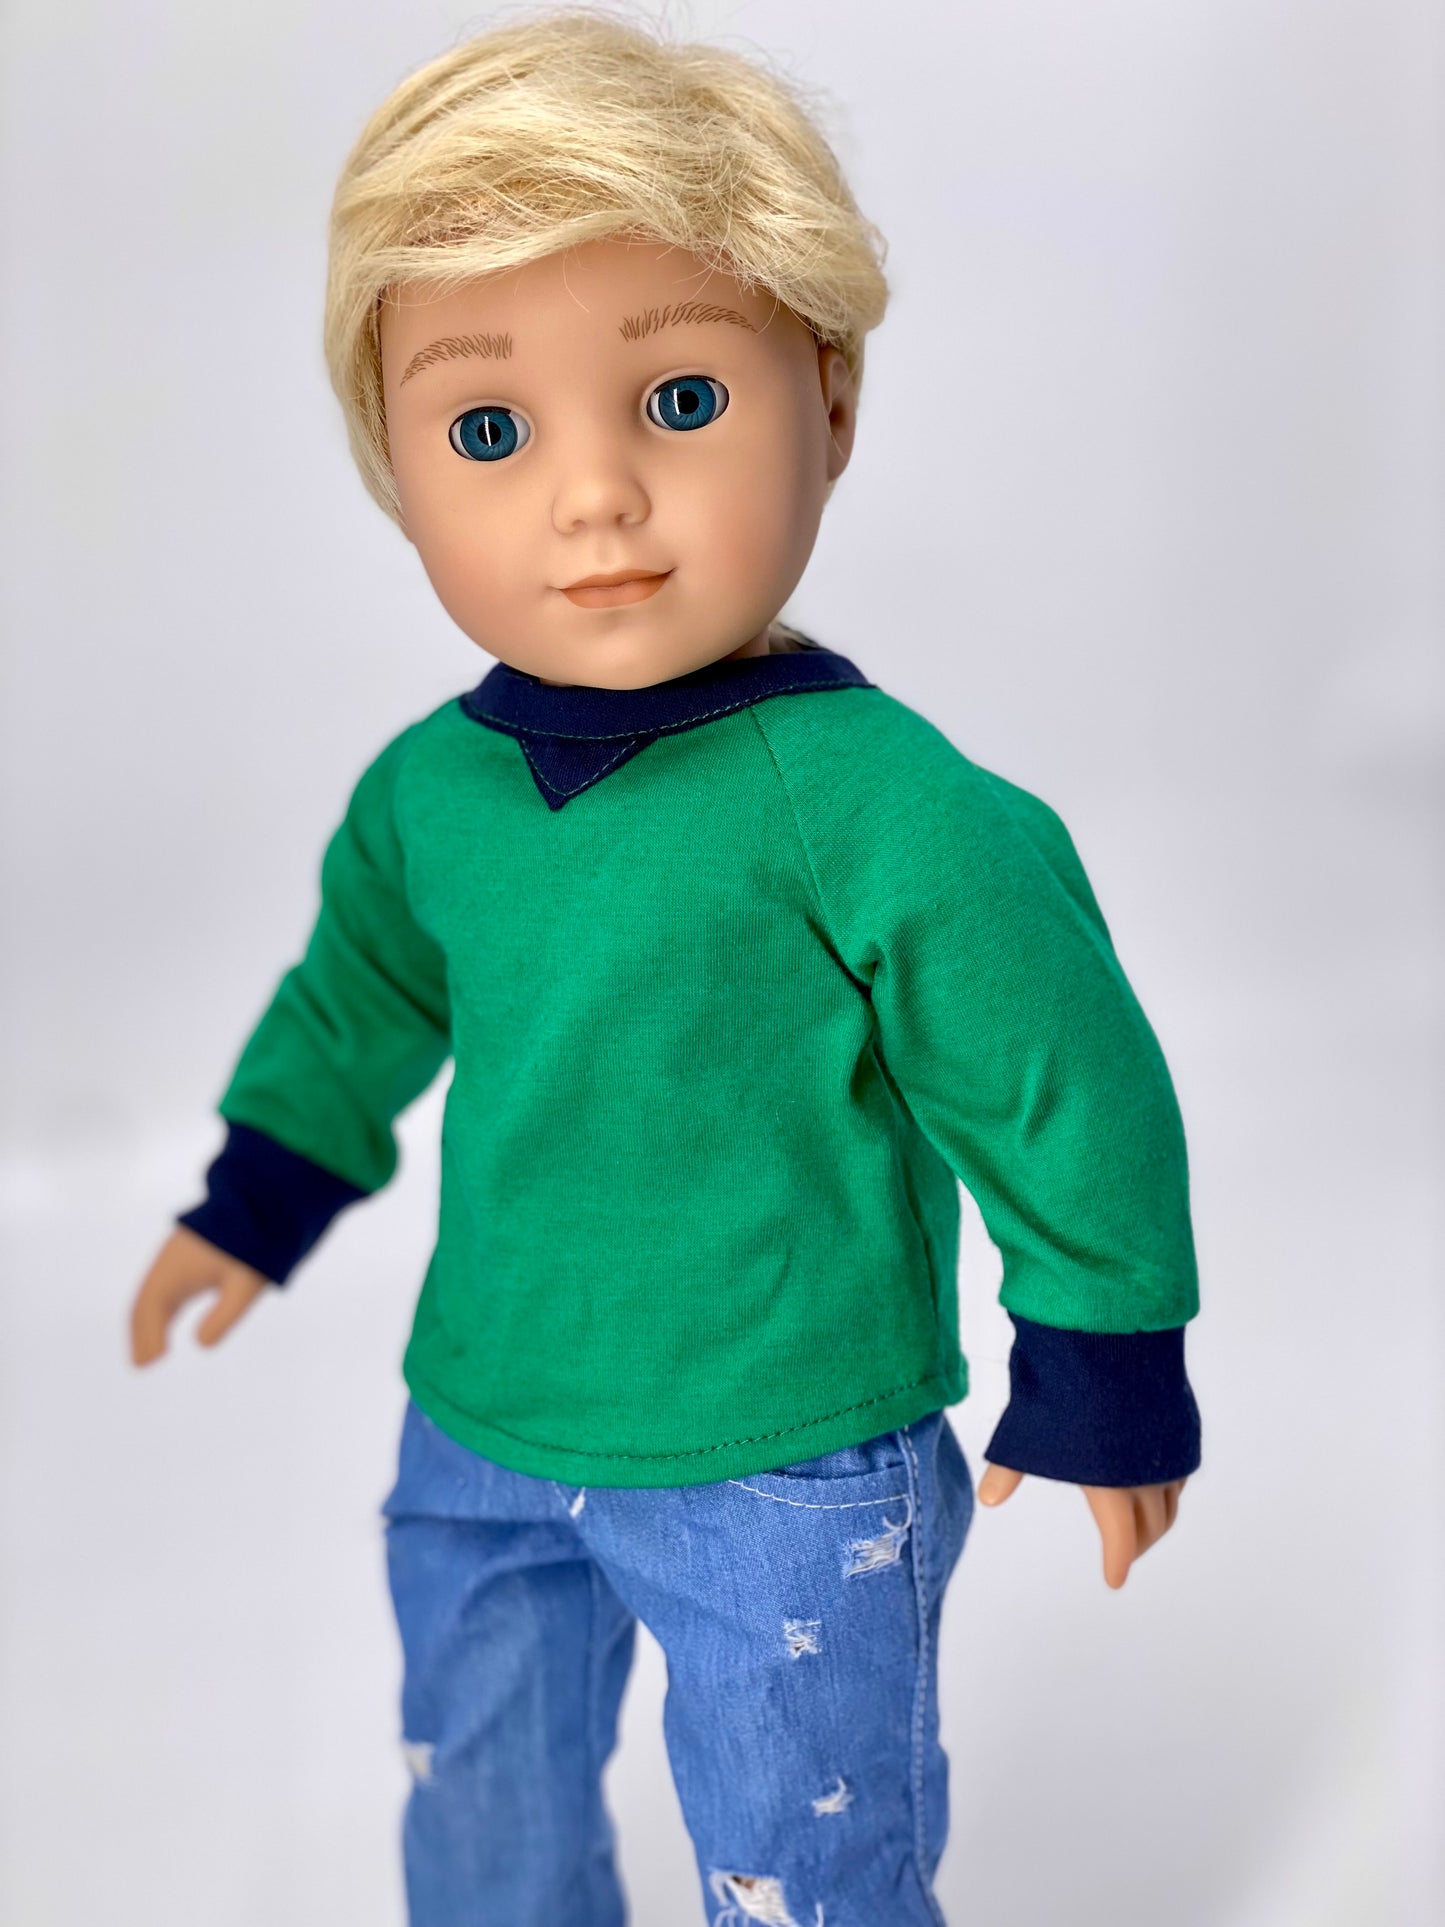 American Girl Doll Size 11.5” Wig “Vincent” in Warm Blonde